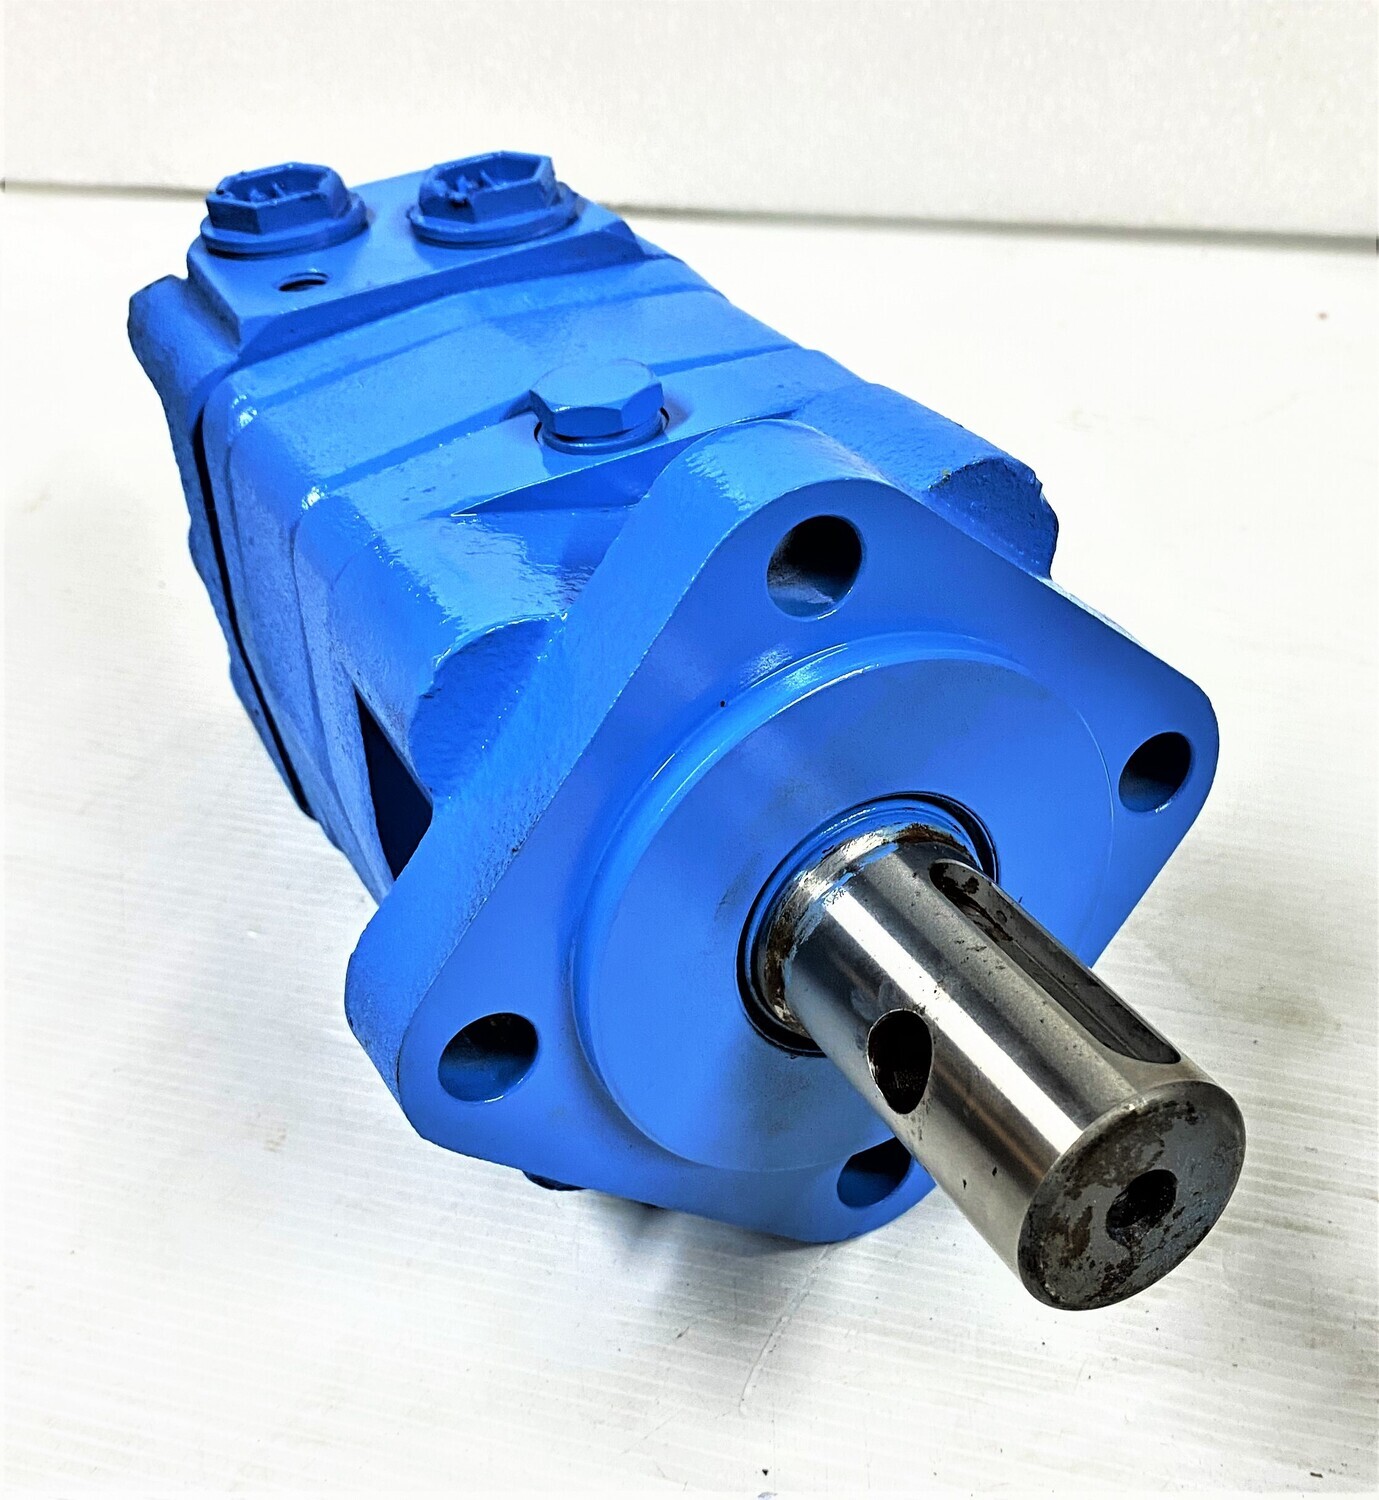 Danfoss OMS 200 High Torque Orbital Hydraulic Motor with 32 mm straight shaft and 4 bolt Magneto mounting flange. 